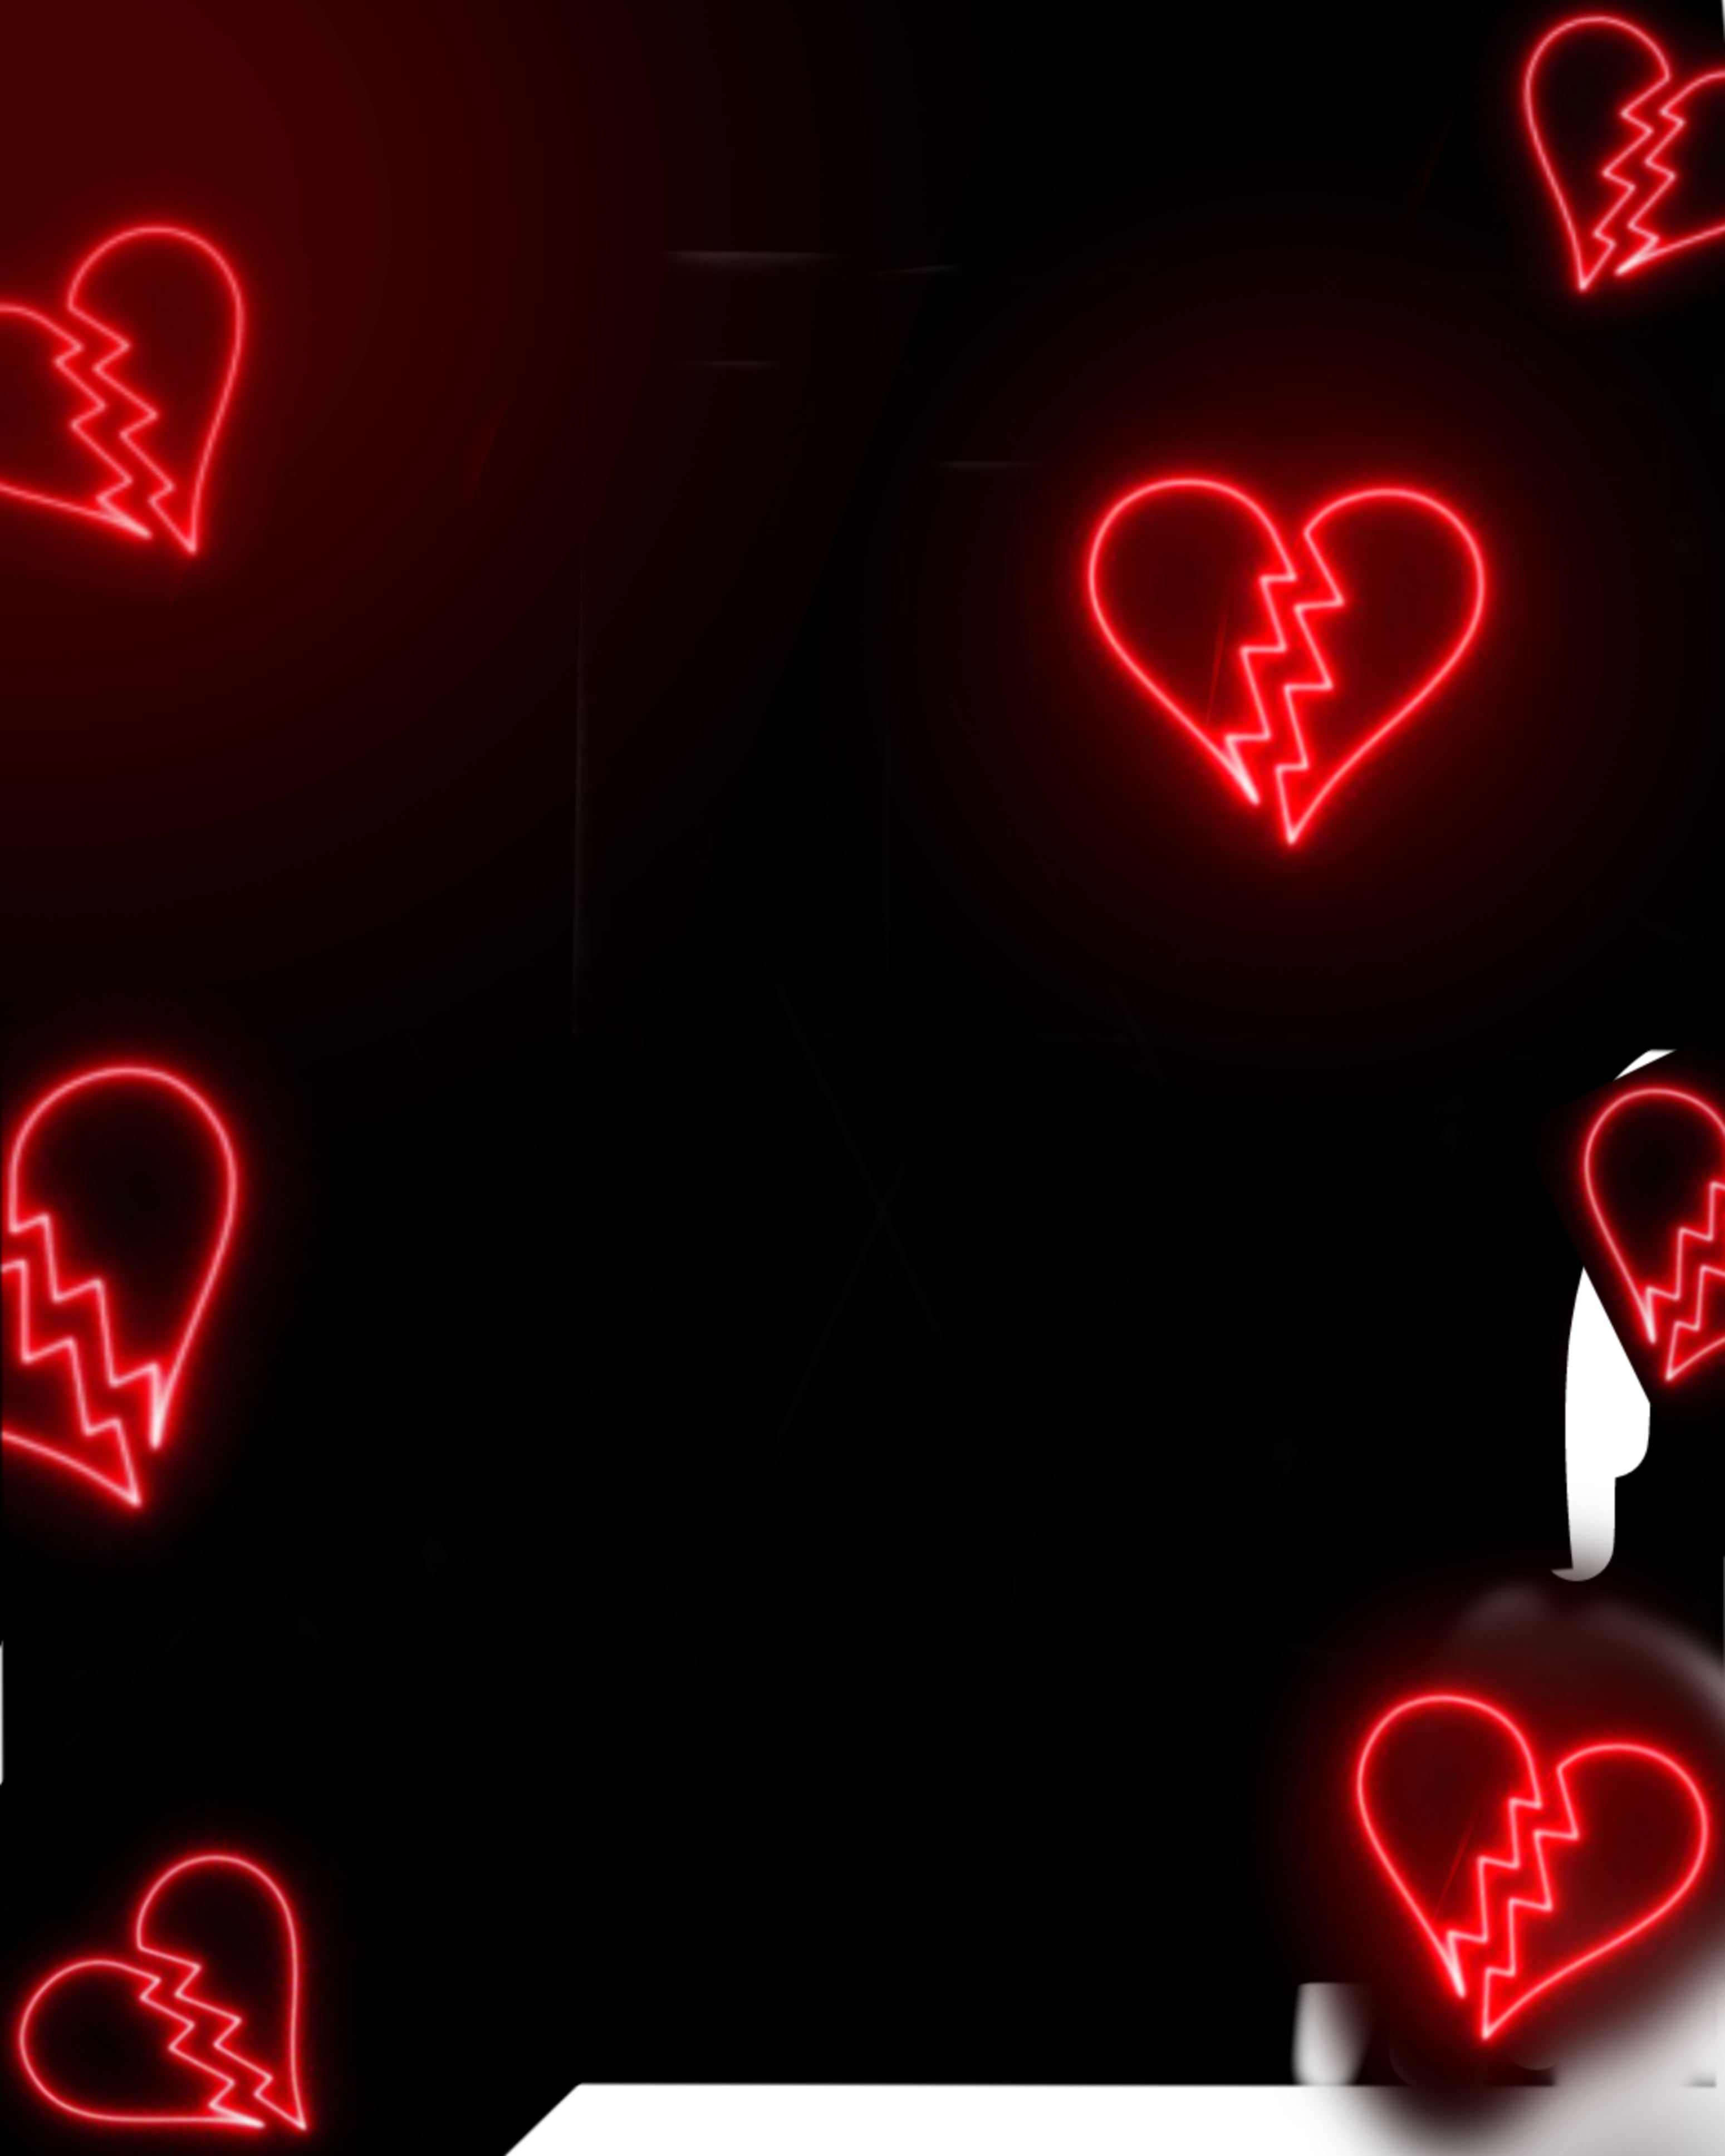 Broken heart background and png download - DJ PHOTO EDITING